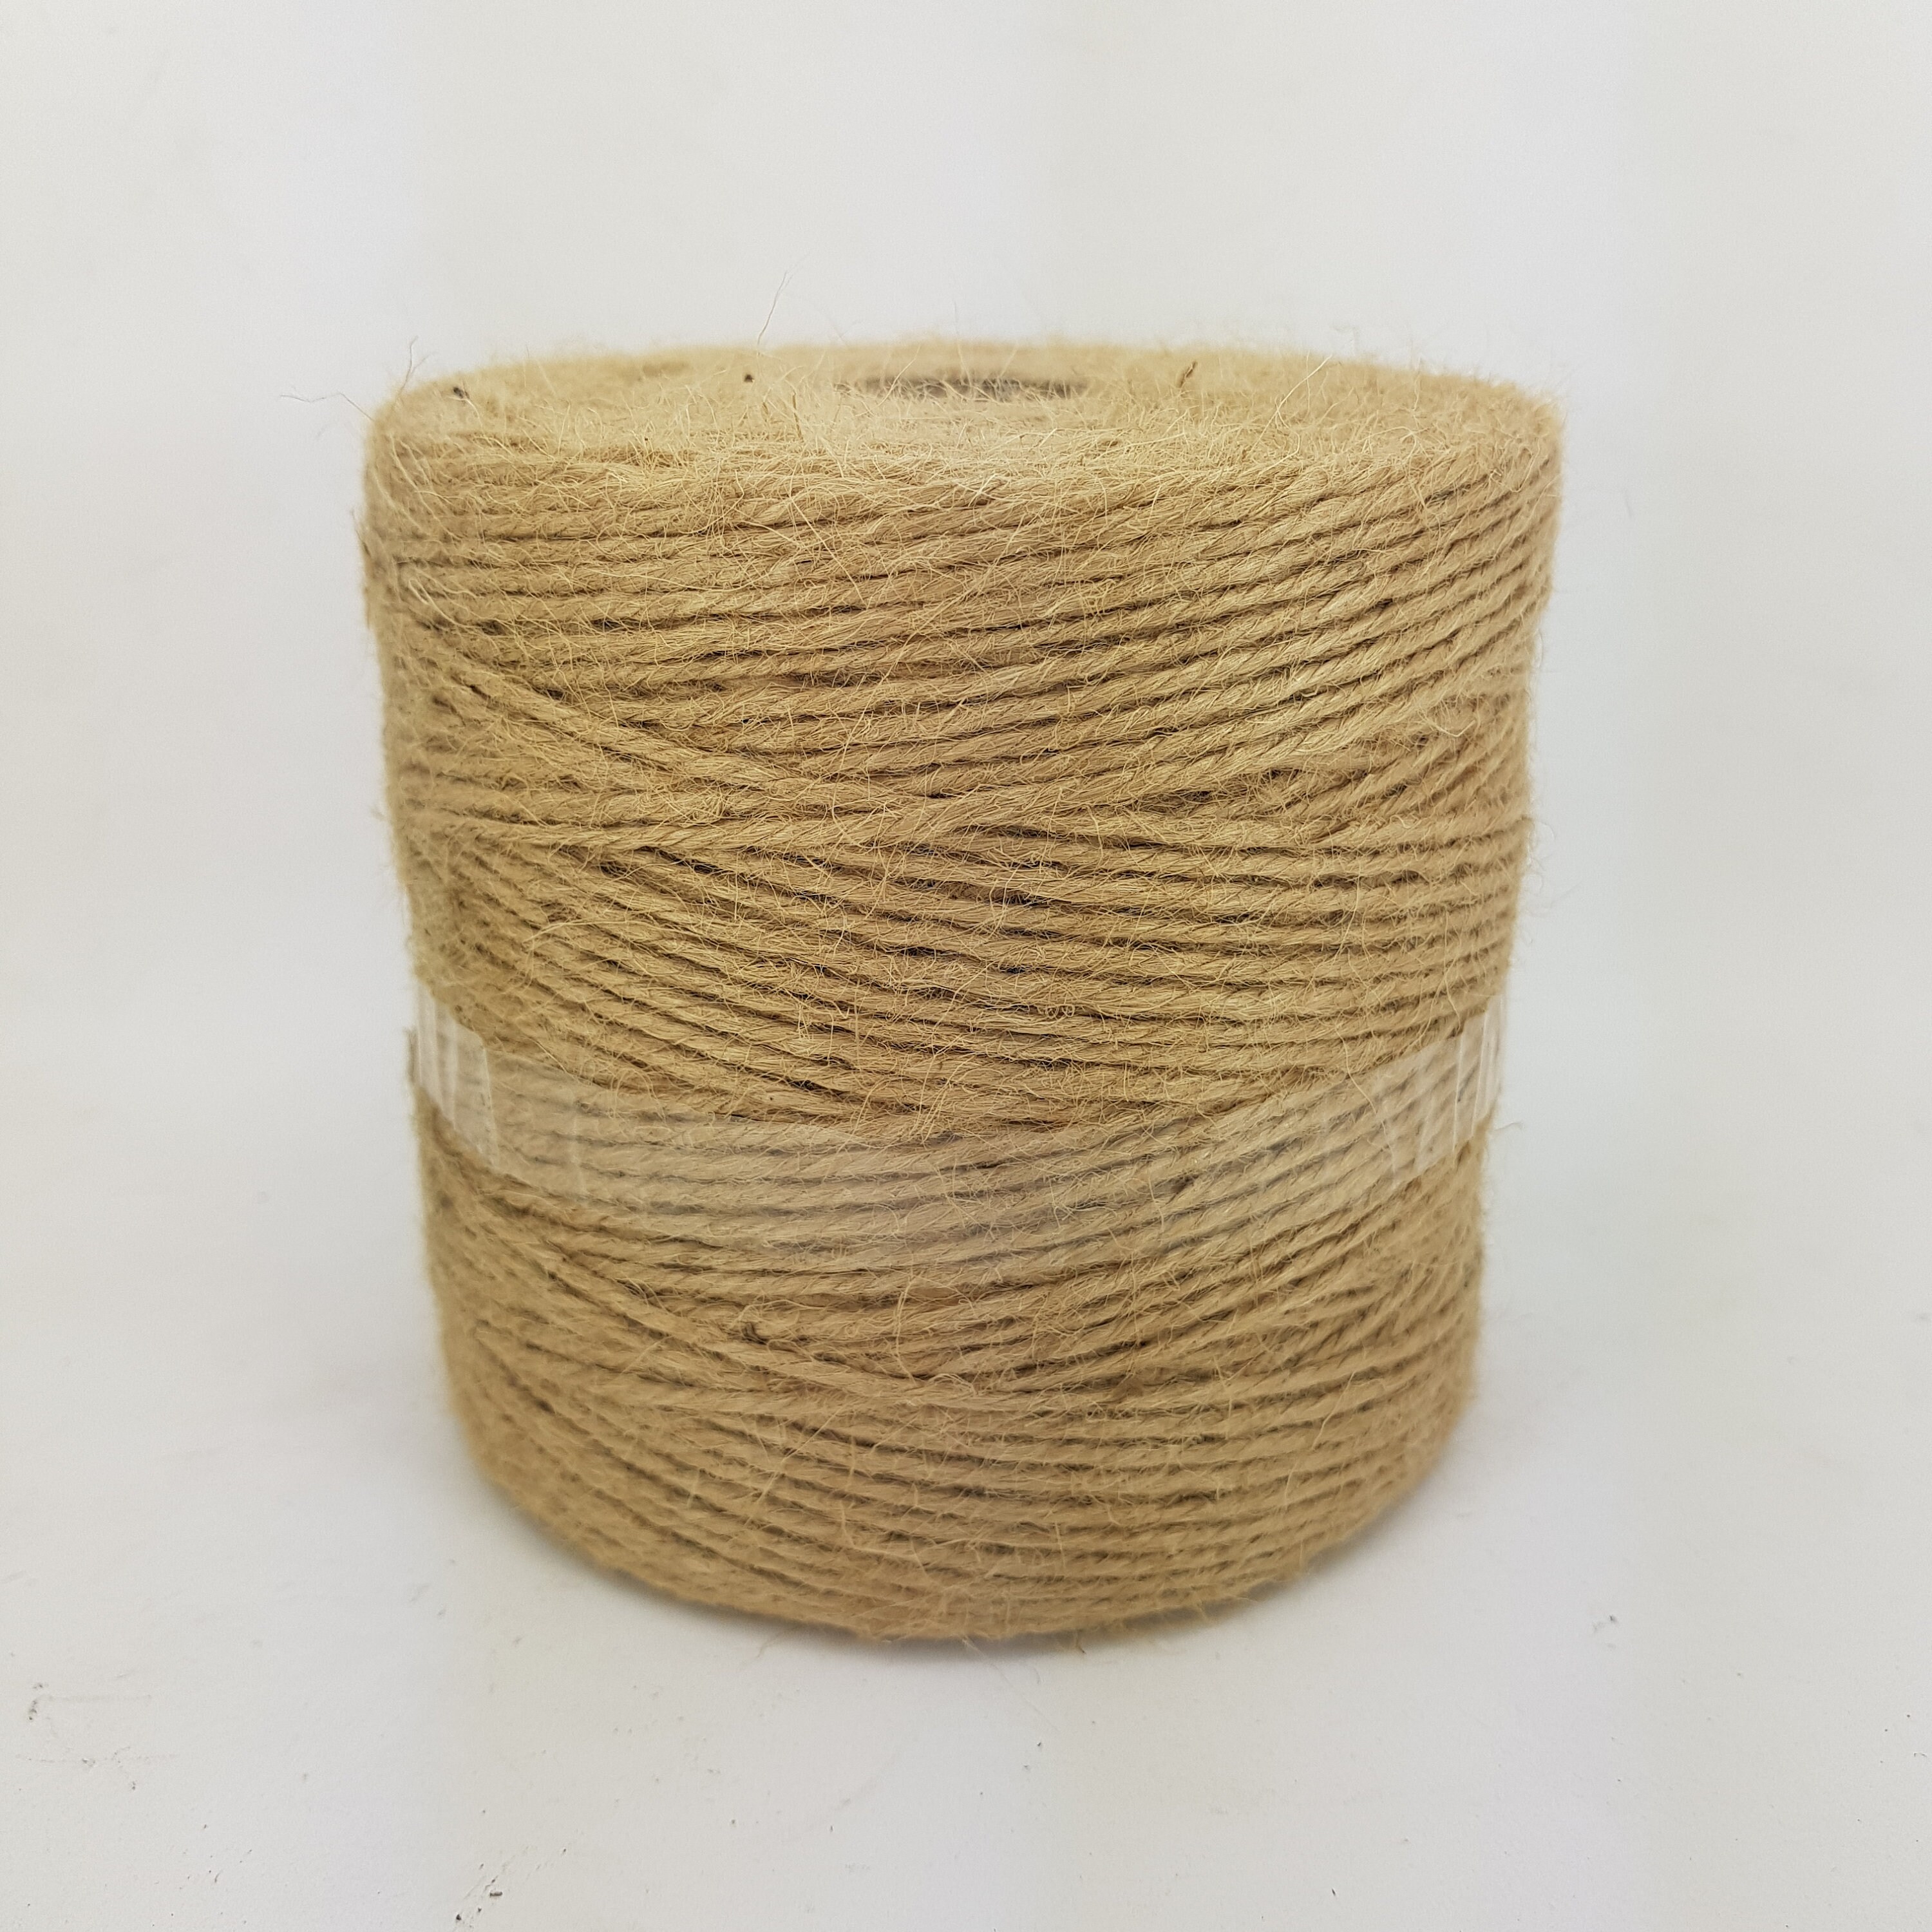 Natural Jute Twine 3mm 328 Feet Crafting Twine String for Crafts Gift,  Craft Projects, Wrapping, Bundling, Packing, Gardening and More, Jute Rope  to